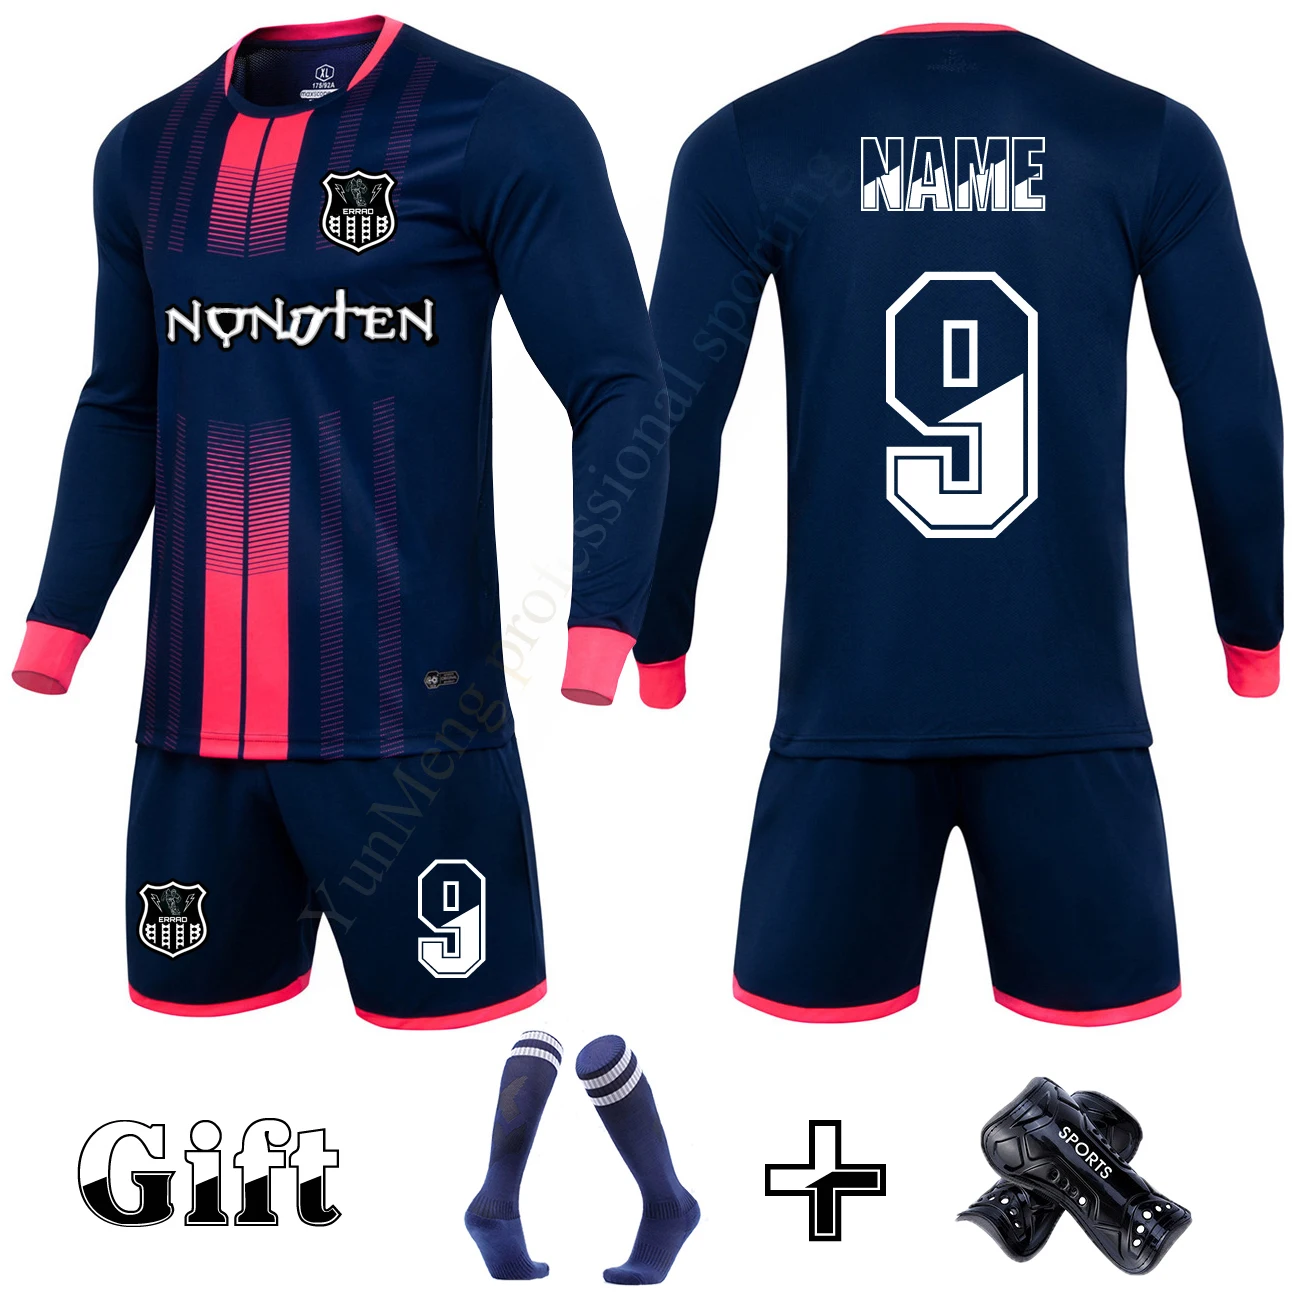 

Customized Adult Children Football Jerseys Uniforms Tracksuit Boys Girls Soccer Clothes Sets Free Soccer Shin Guards Pads Sock